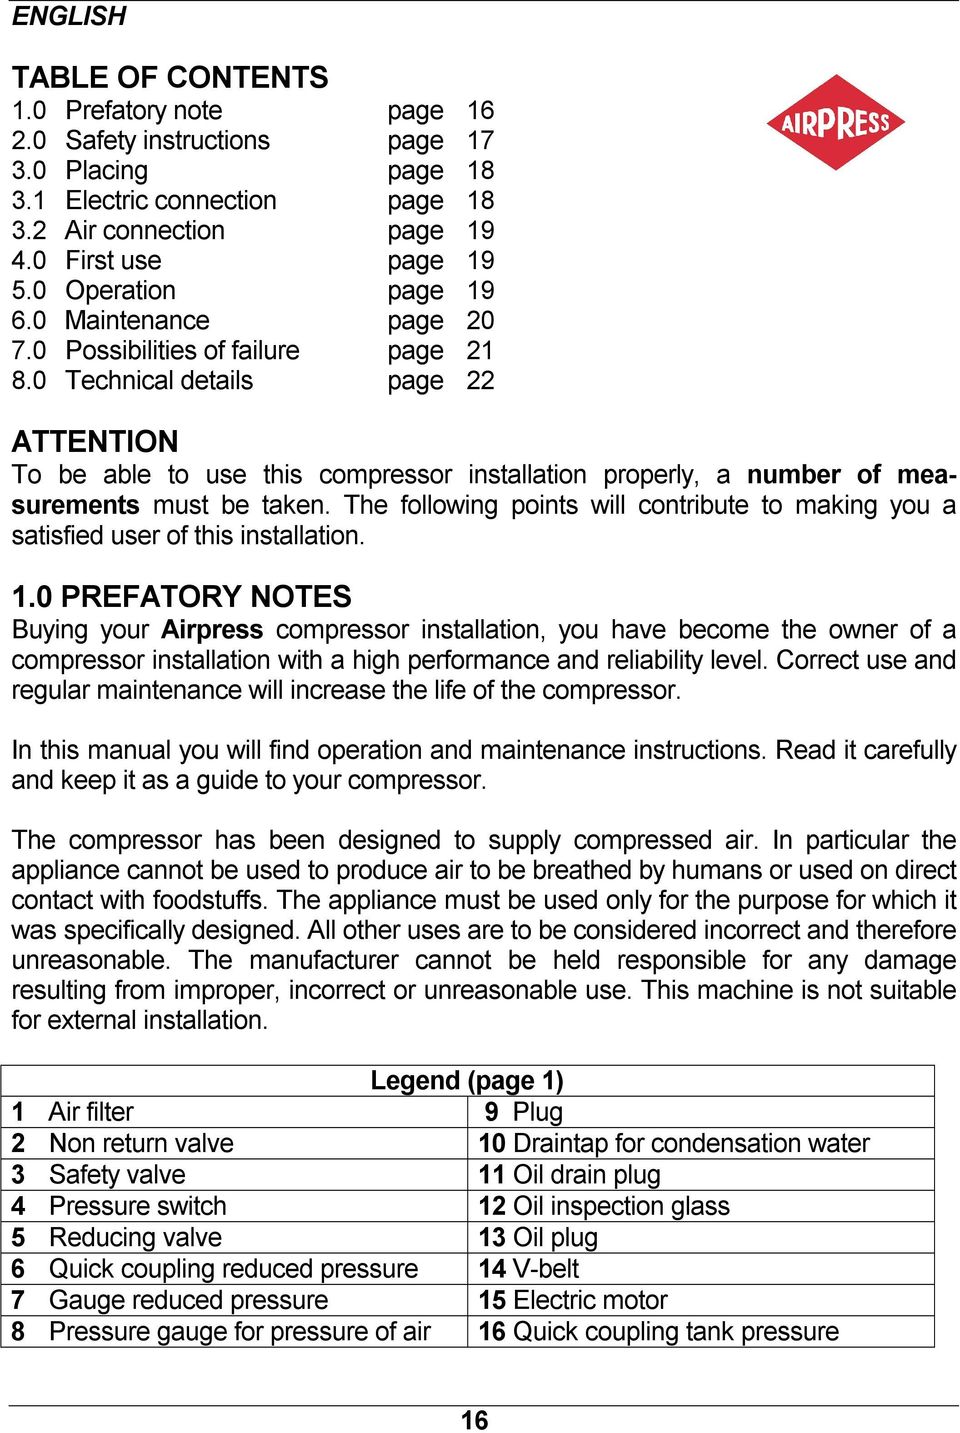 0 Technical details page 22 ATTENTION To be able to use this compressor installation properly, a number of measurements must be taken.